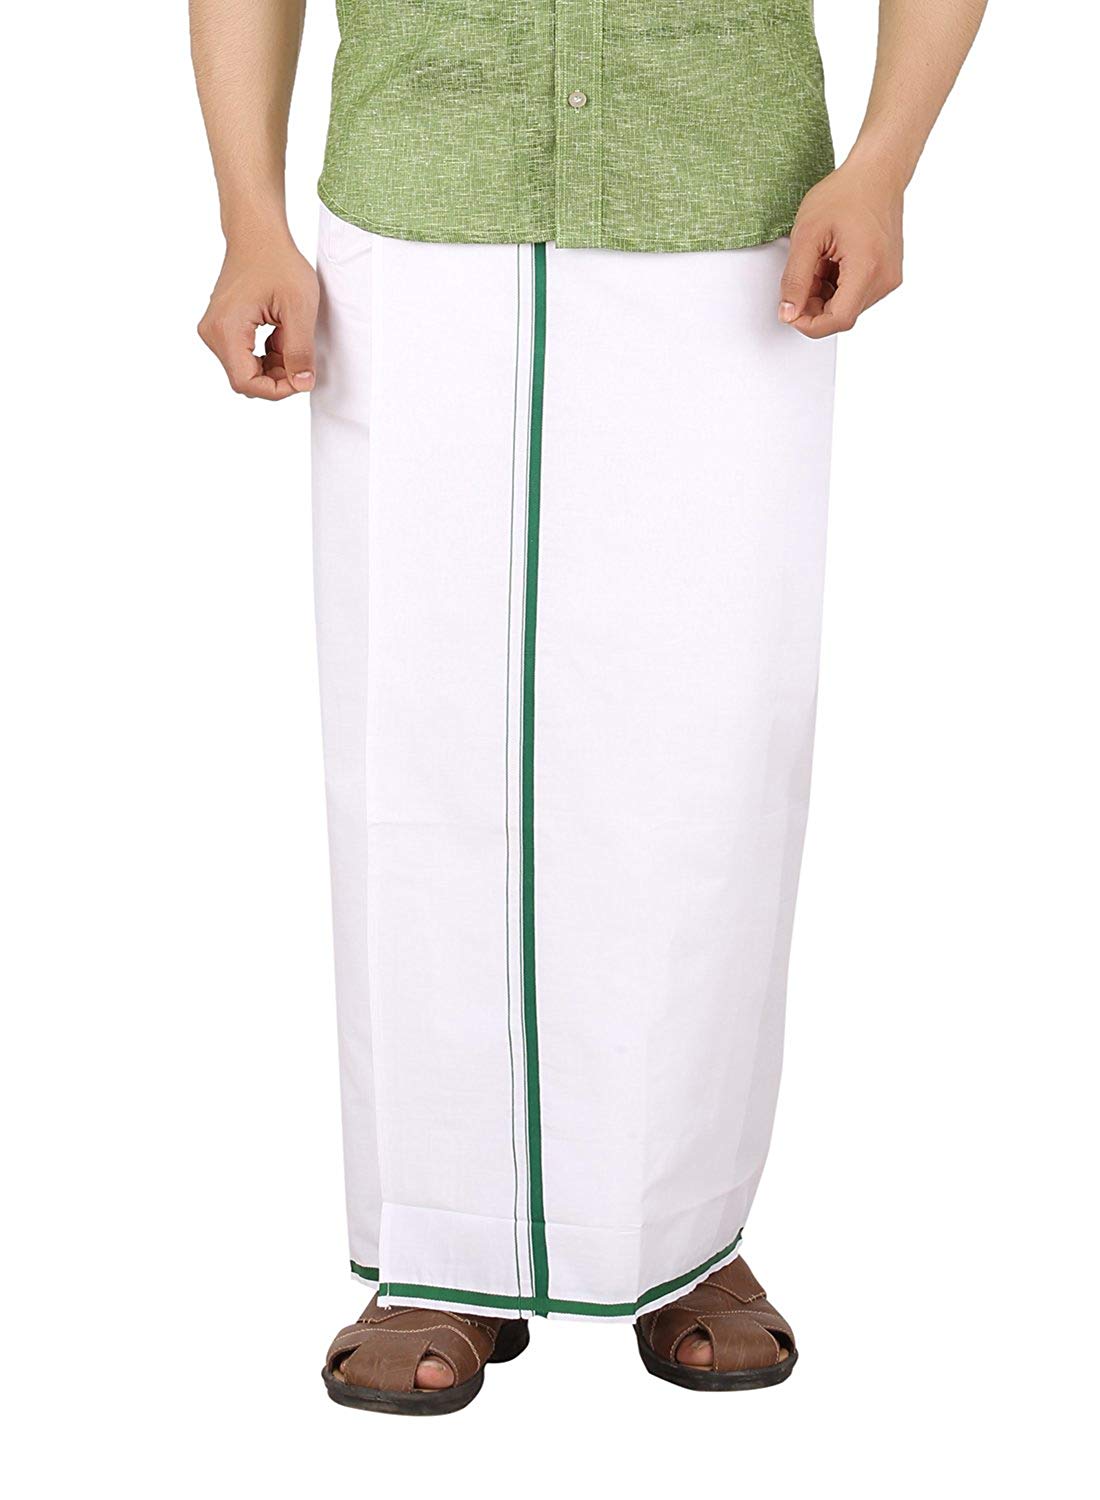 Stylesindia Cotton Single Layer White Dhoti With Fancy Colored Border